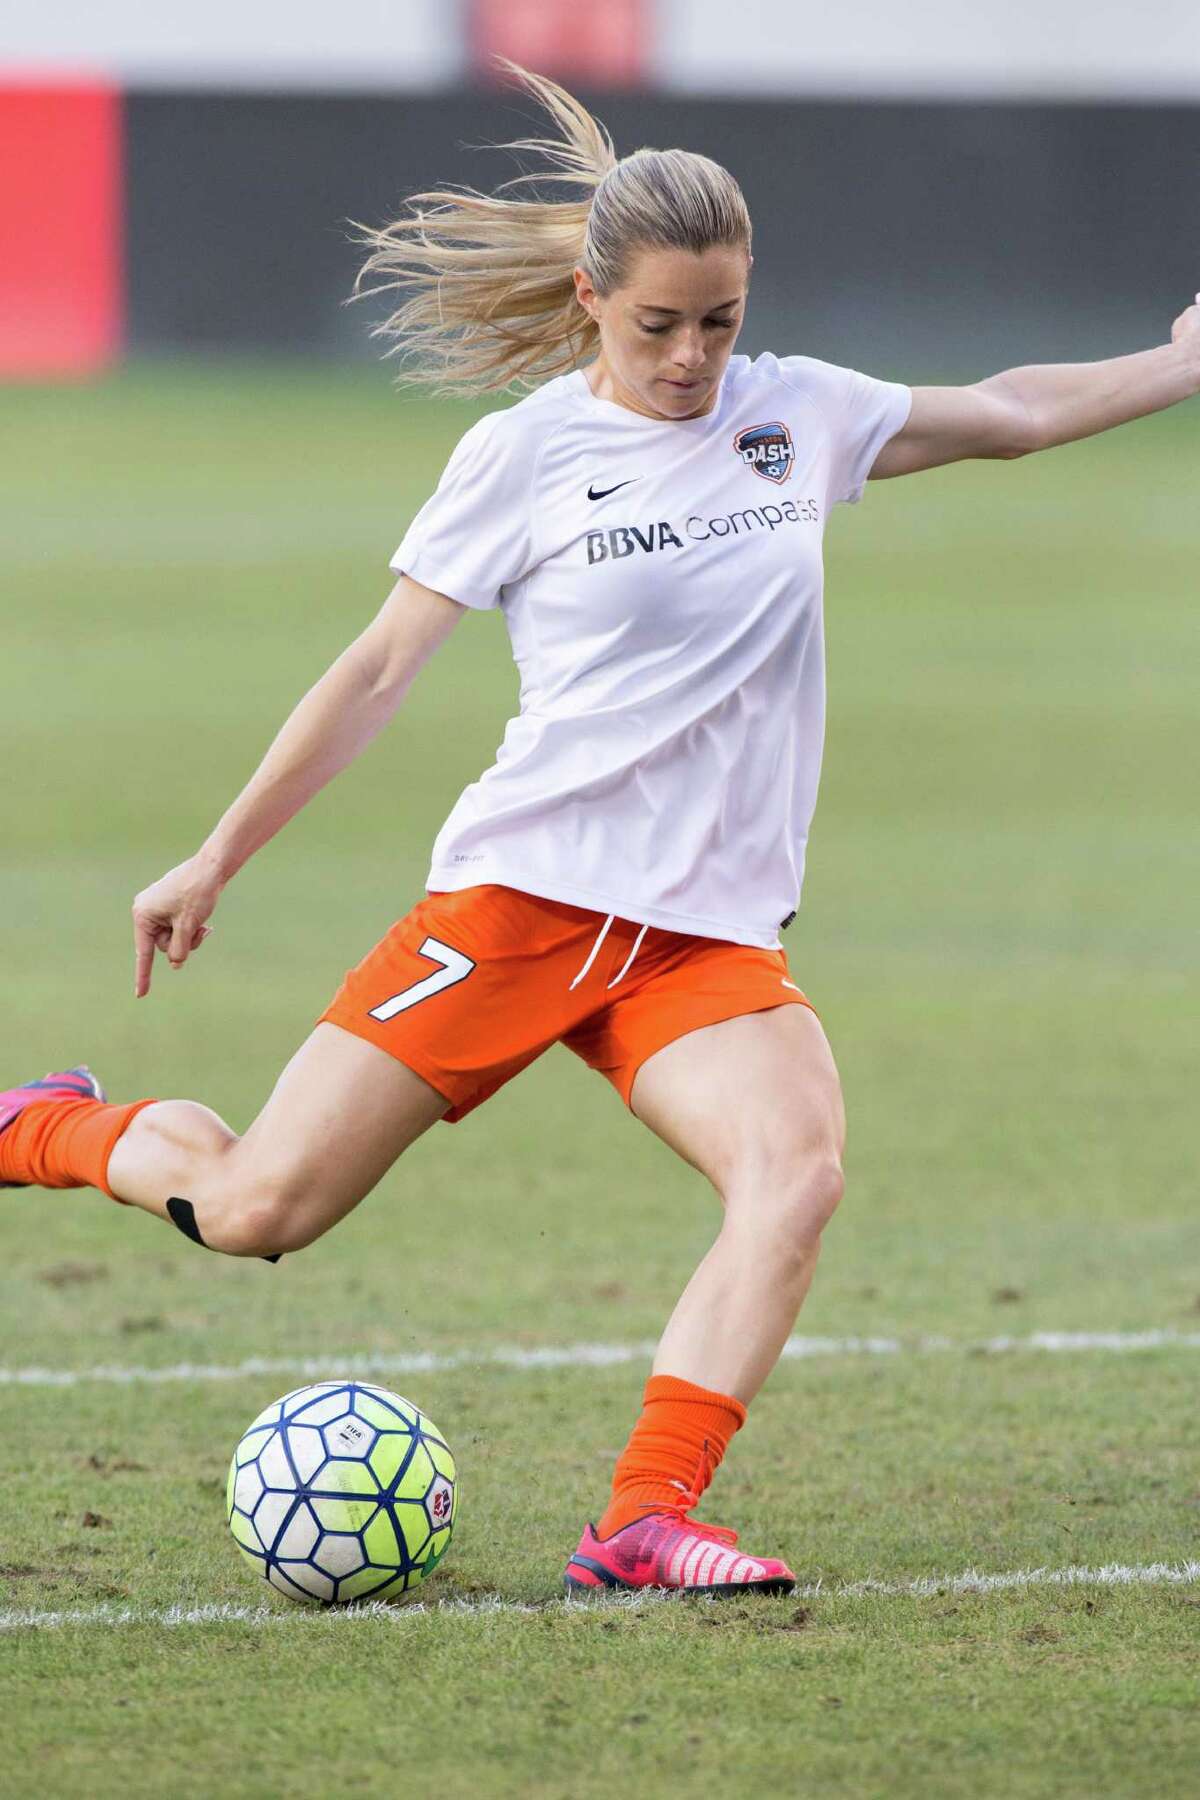 Houston Dash forward Kealia Ohai (7) warms up on the field against the FC Kansas City before action between the Houston Dash and the FC Kansas City during a soccer game at BBVA Compass, Sunday, June 19, 2016, in Houston. FC Kansas City defeated Houston Dash 1-0. ( Juan DeLeon / for the Houston Chronicle )